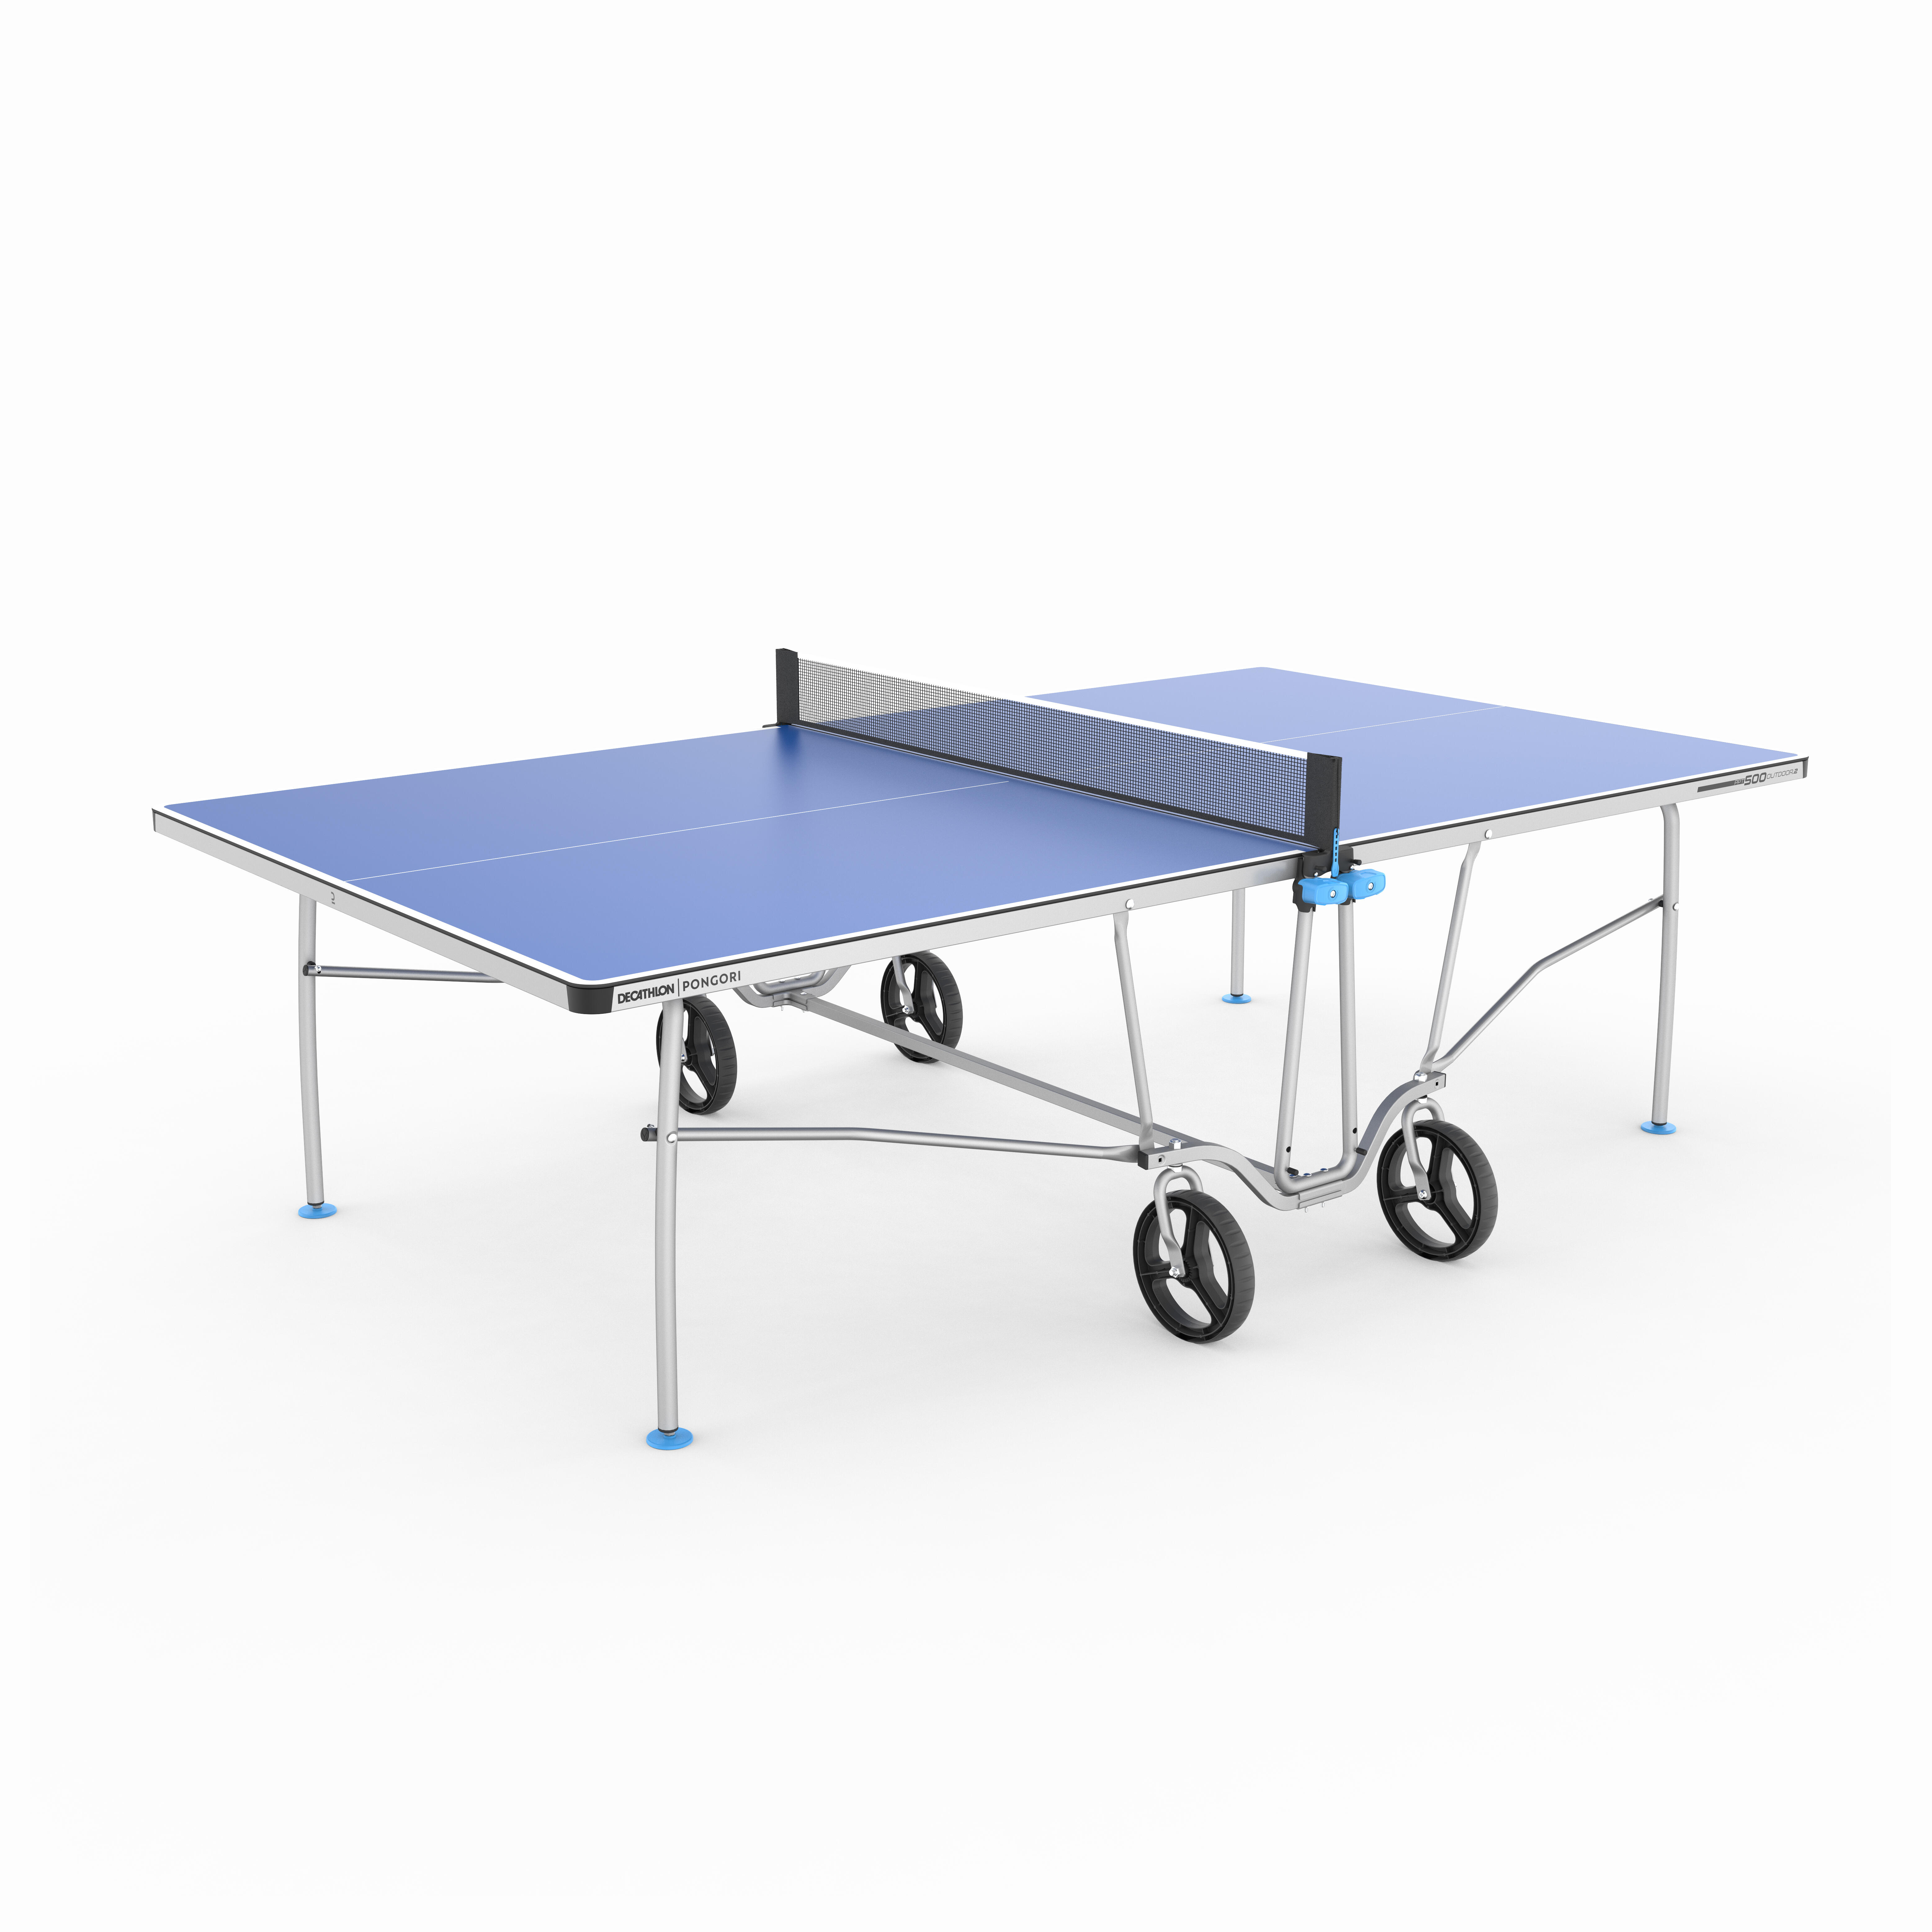 Table Tennis, Ping Pong Tables, Portable Nets